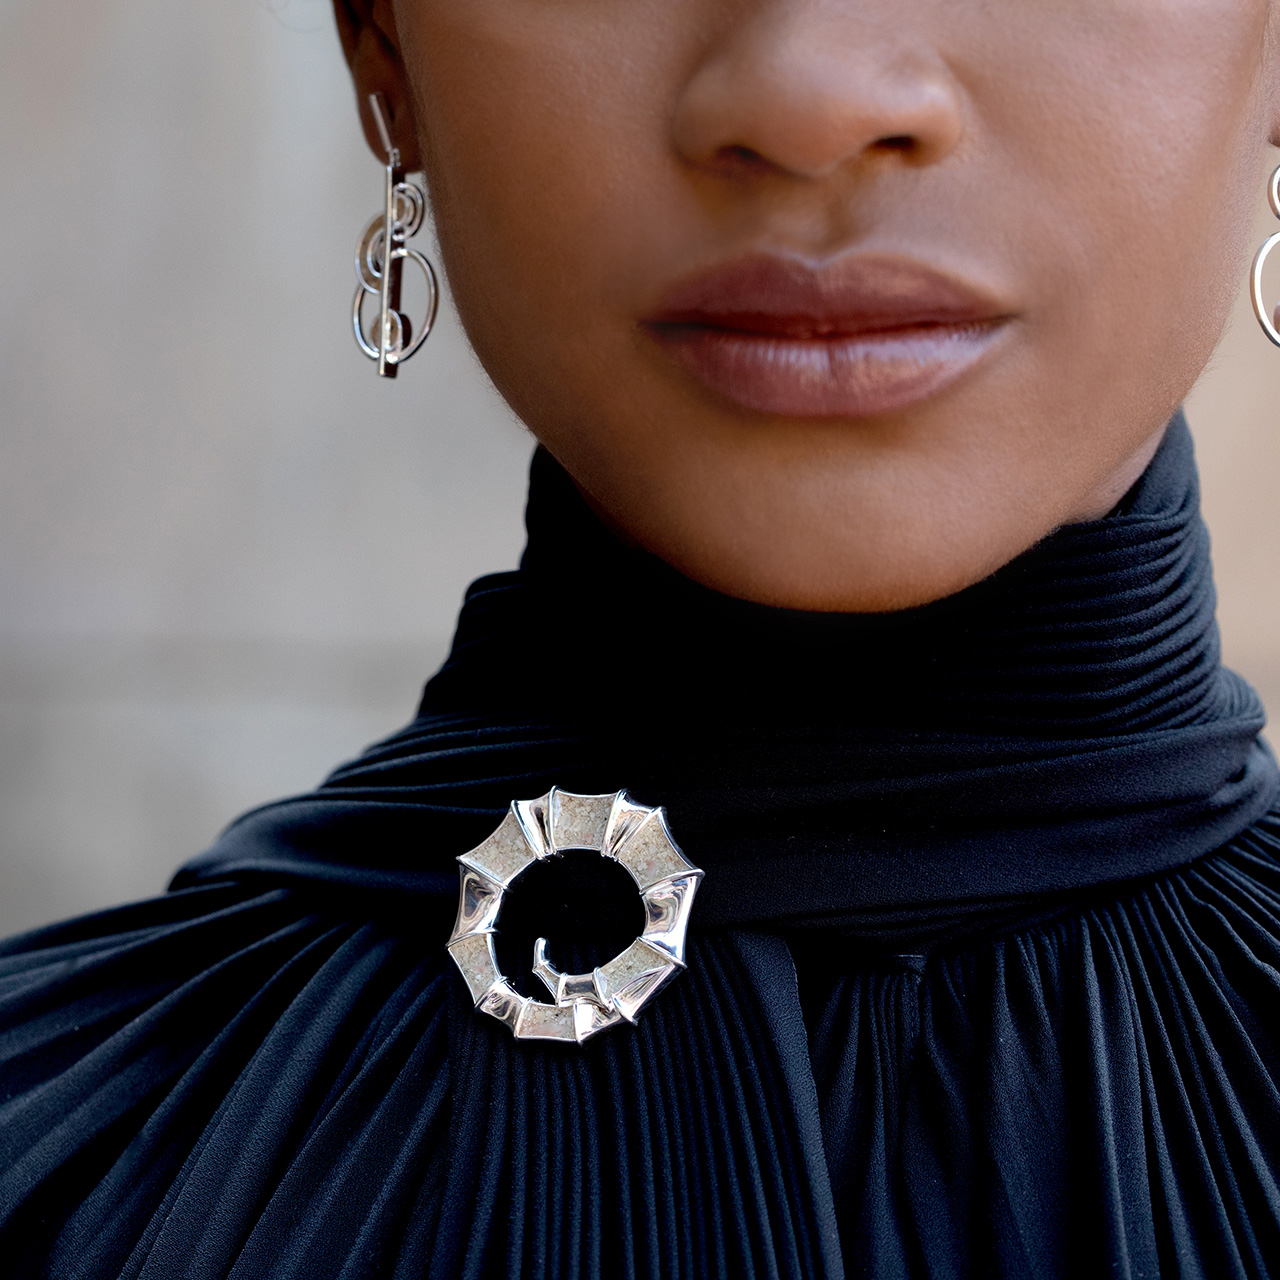 The BREEDLOVE Necklace & Brooch by Dy'amond Breedlove